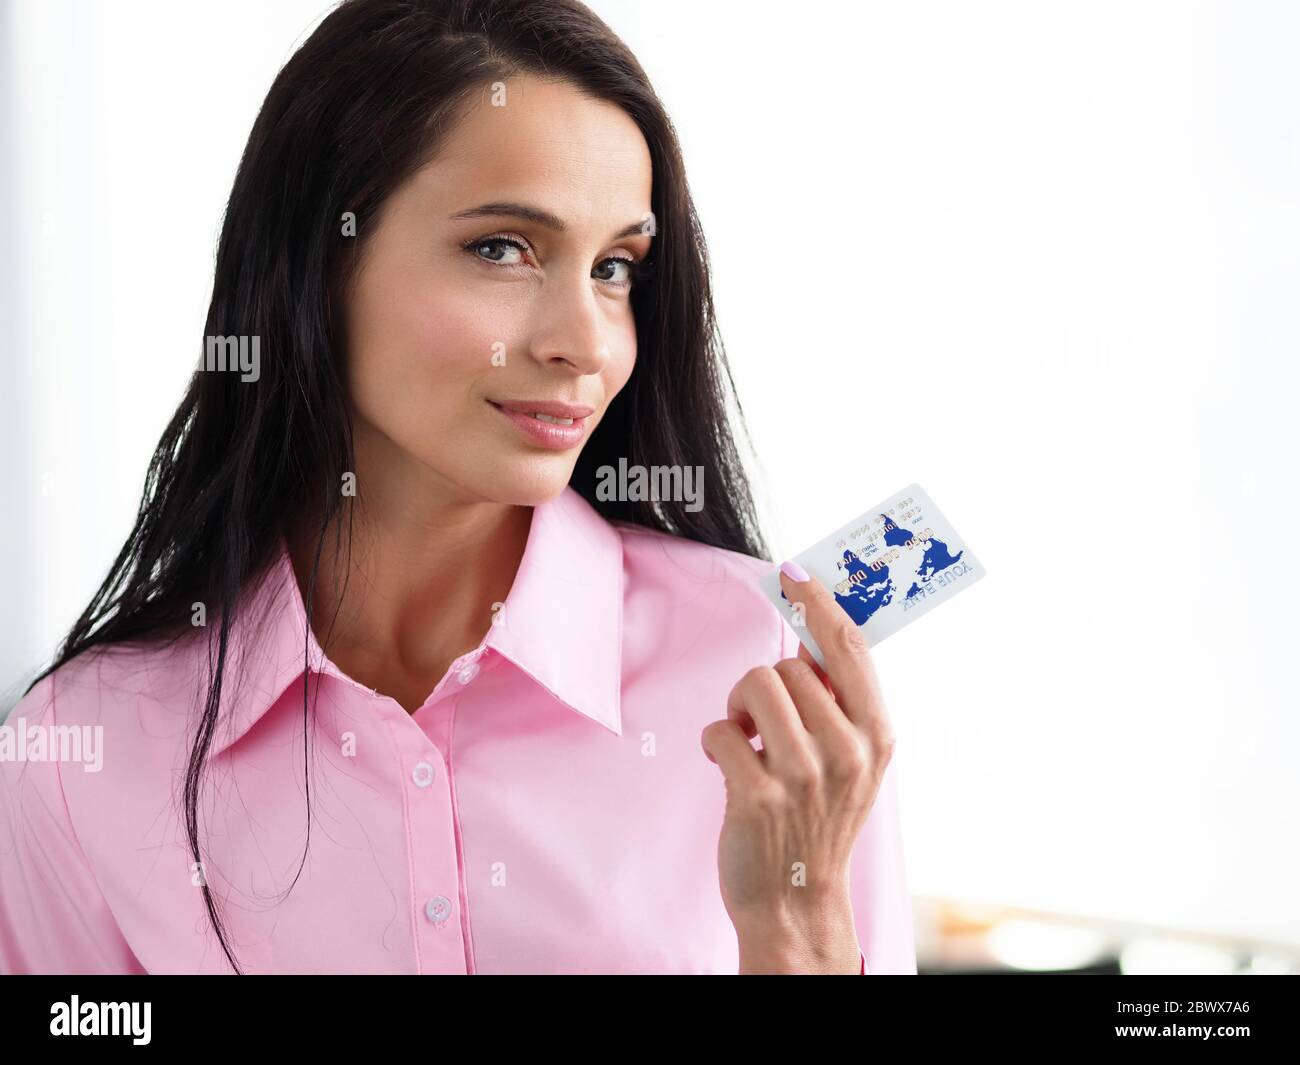 Woman paying for product by credit card Stock Photo